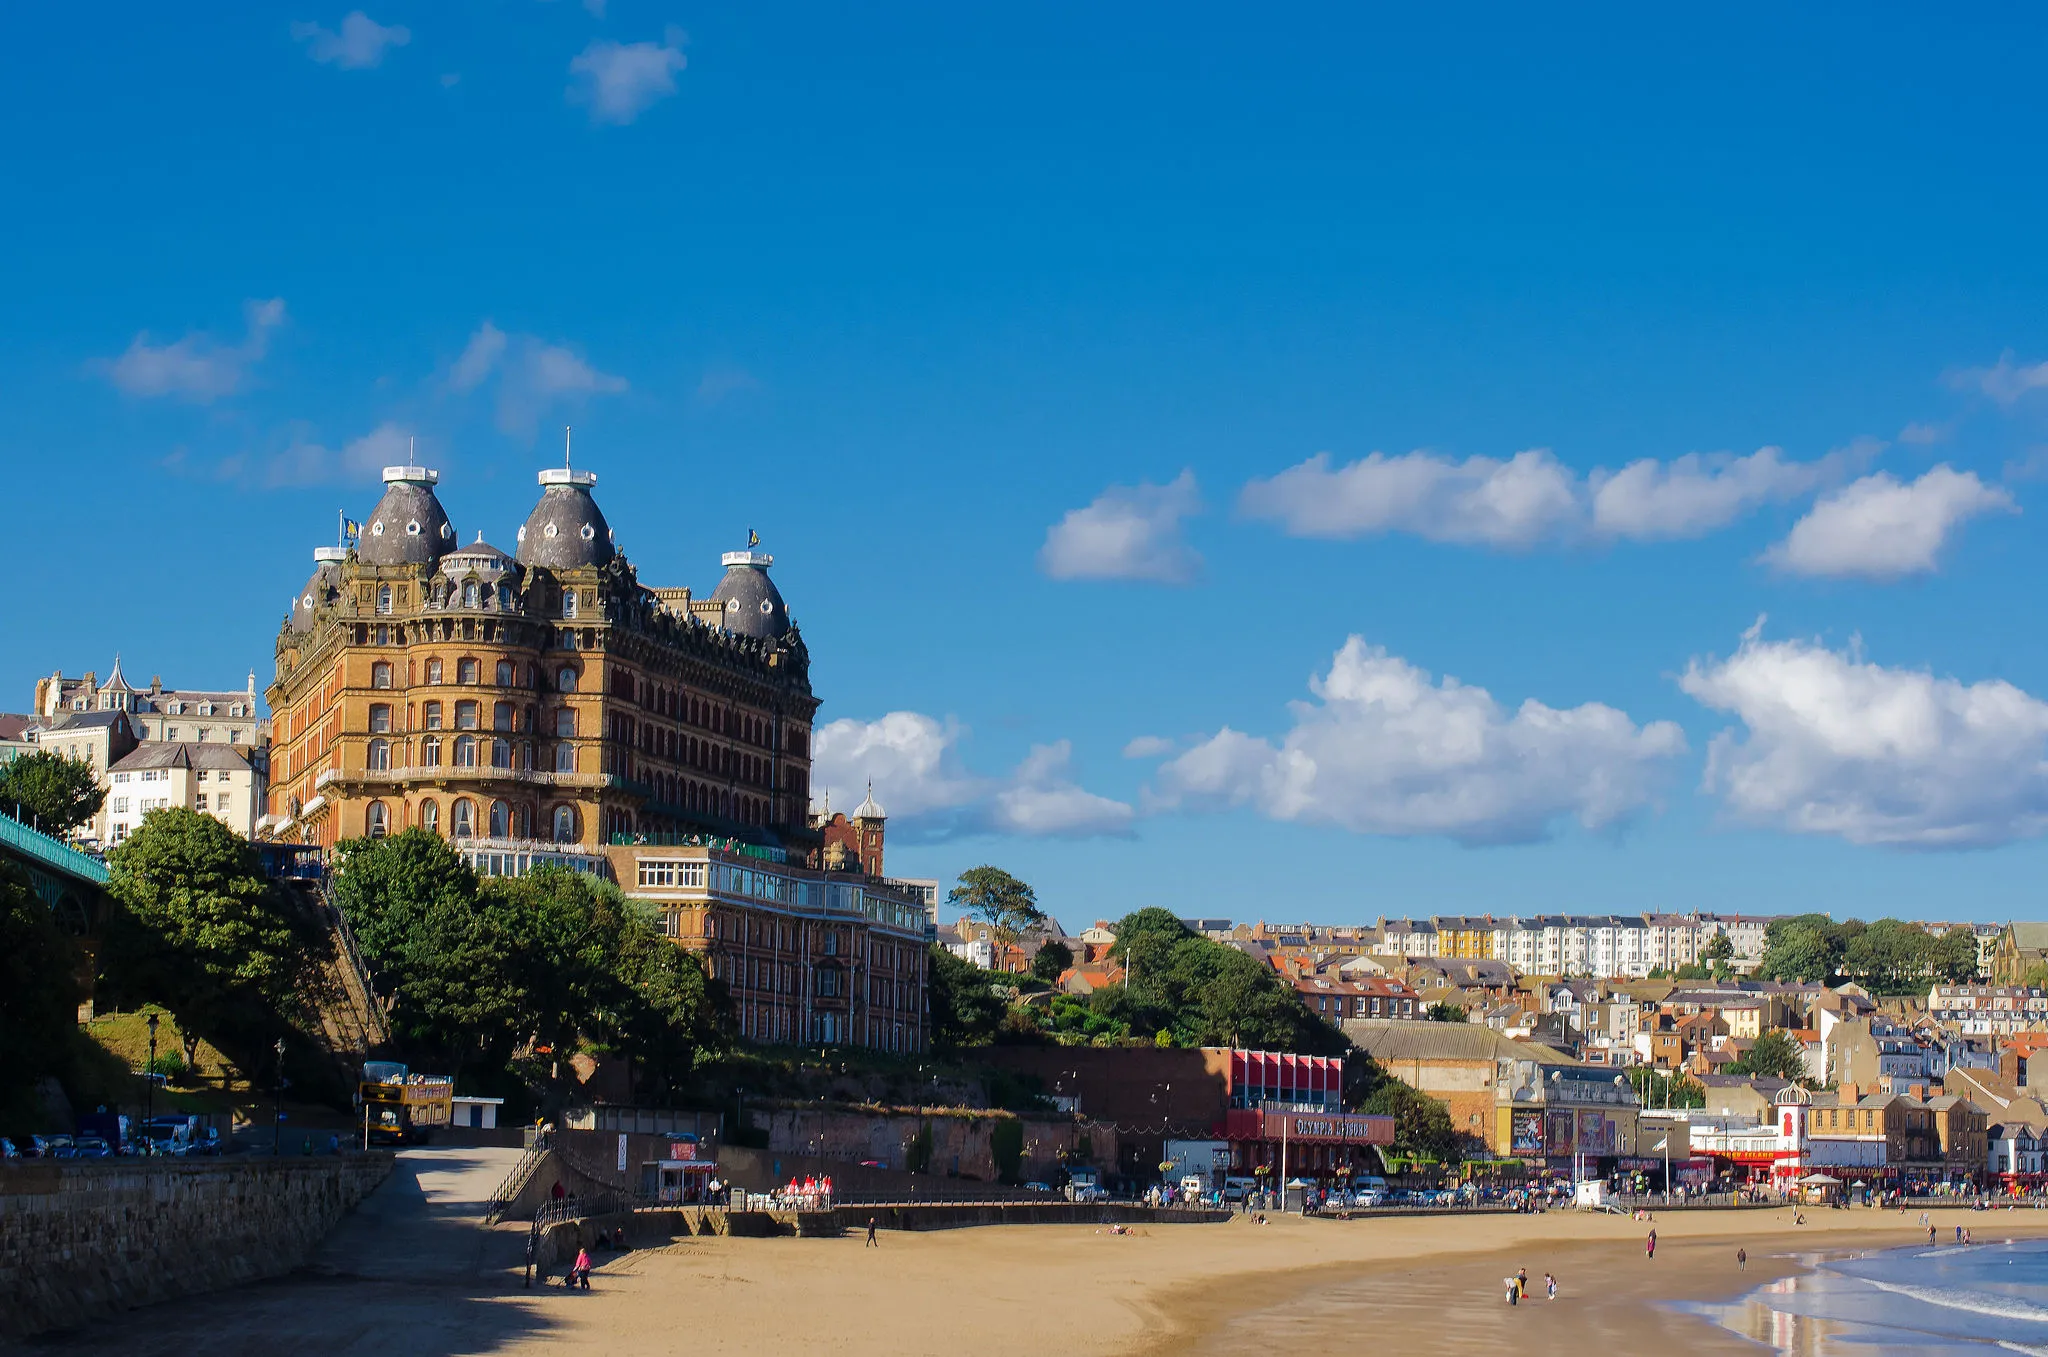 Photo showing: The Grand Hotel, Scarborough, North Yorkshire, England.

Copyright Tom Tolkien